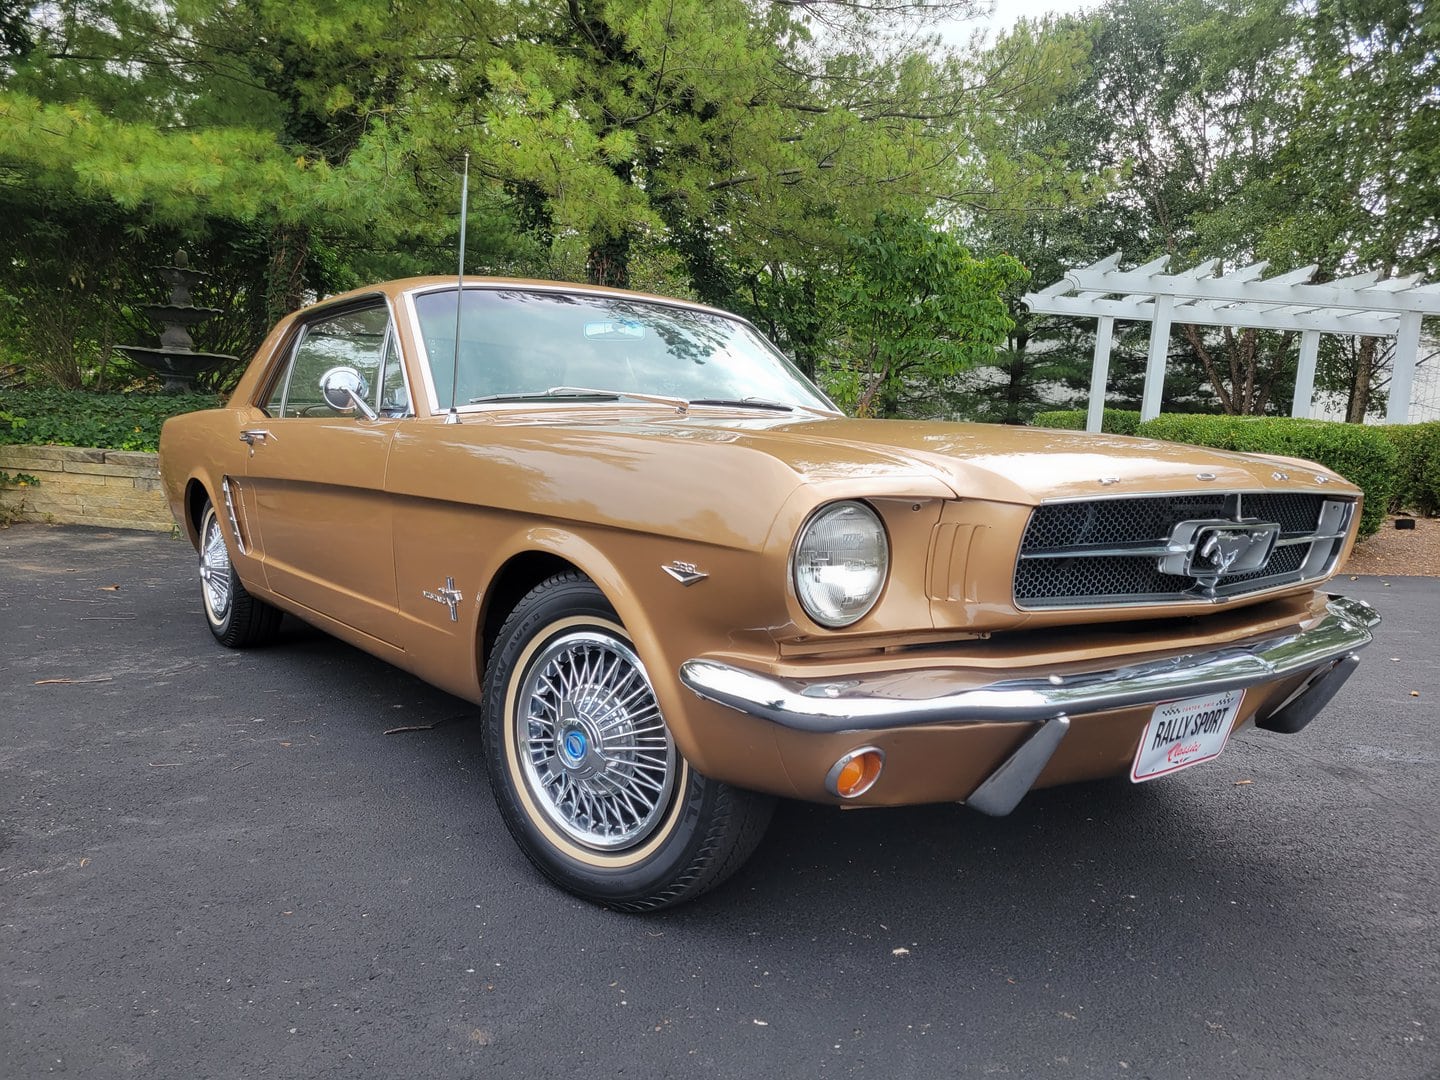 A 1965 tan Ford Mustang parked in a parking lot.